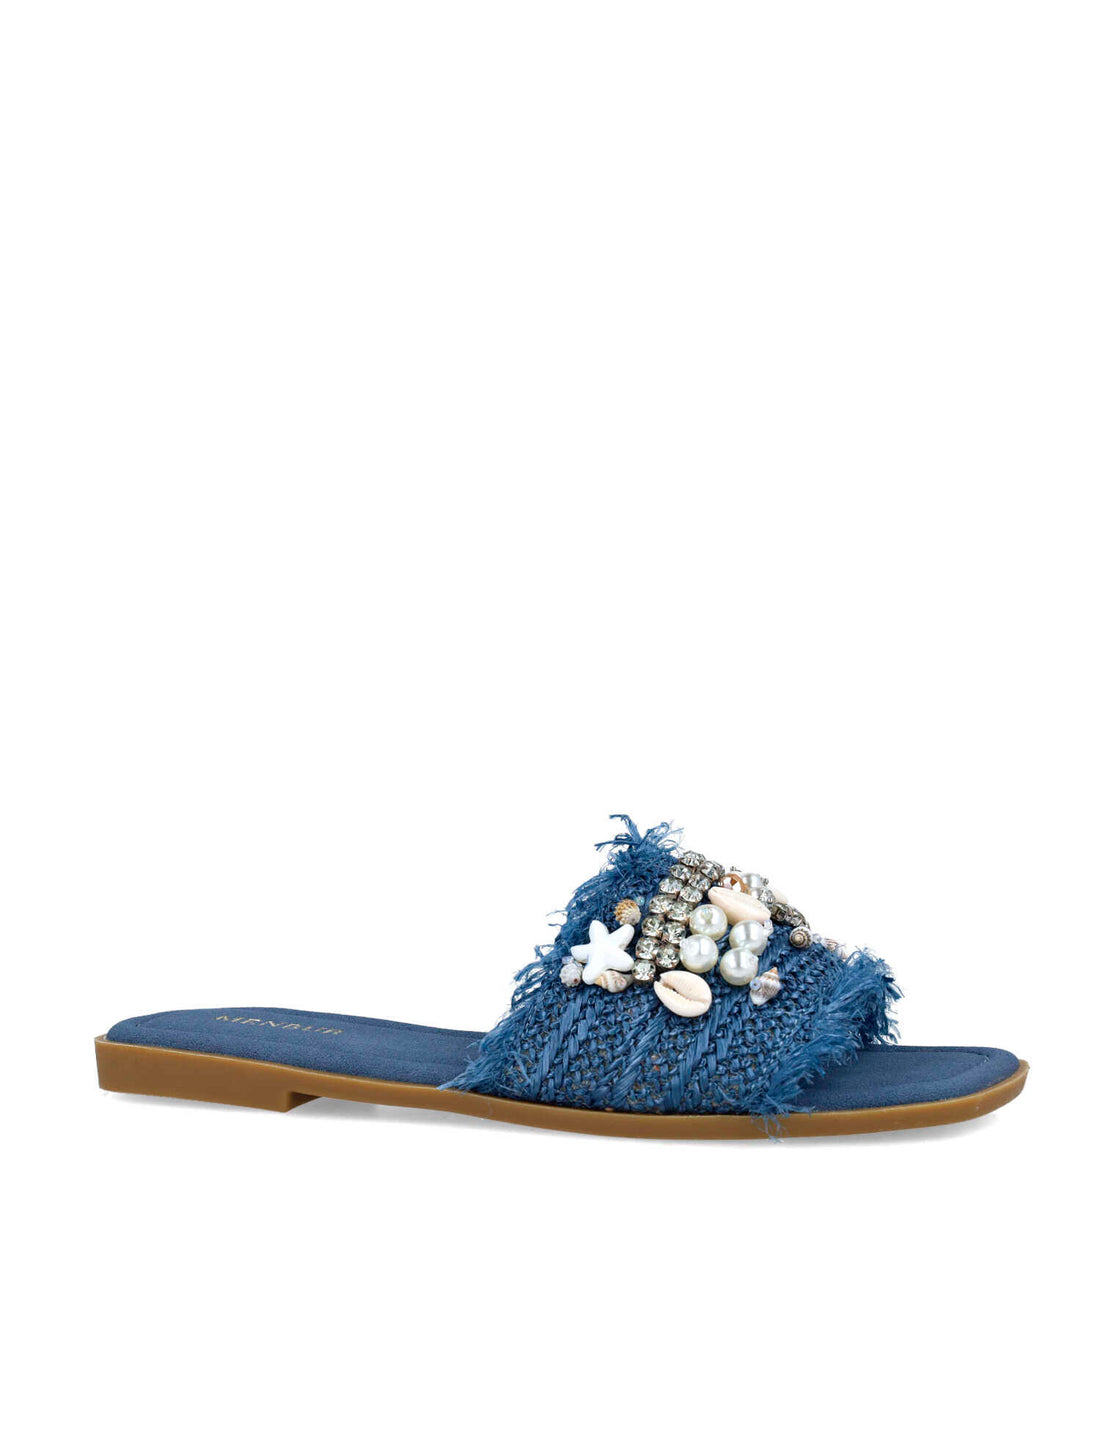 Blue Slippers With Embellishments_25386_51_02